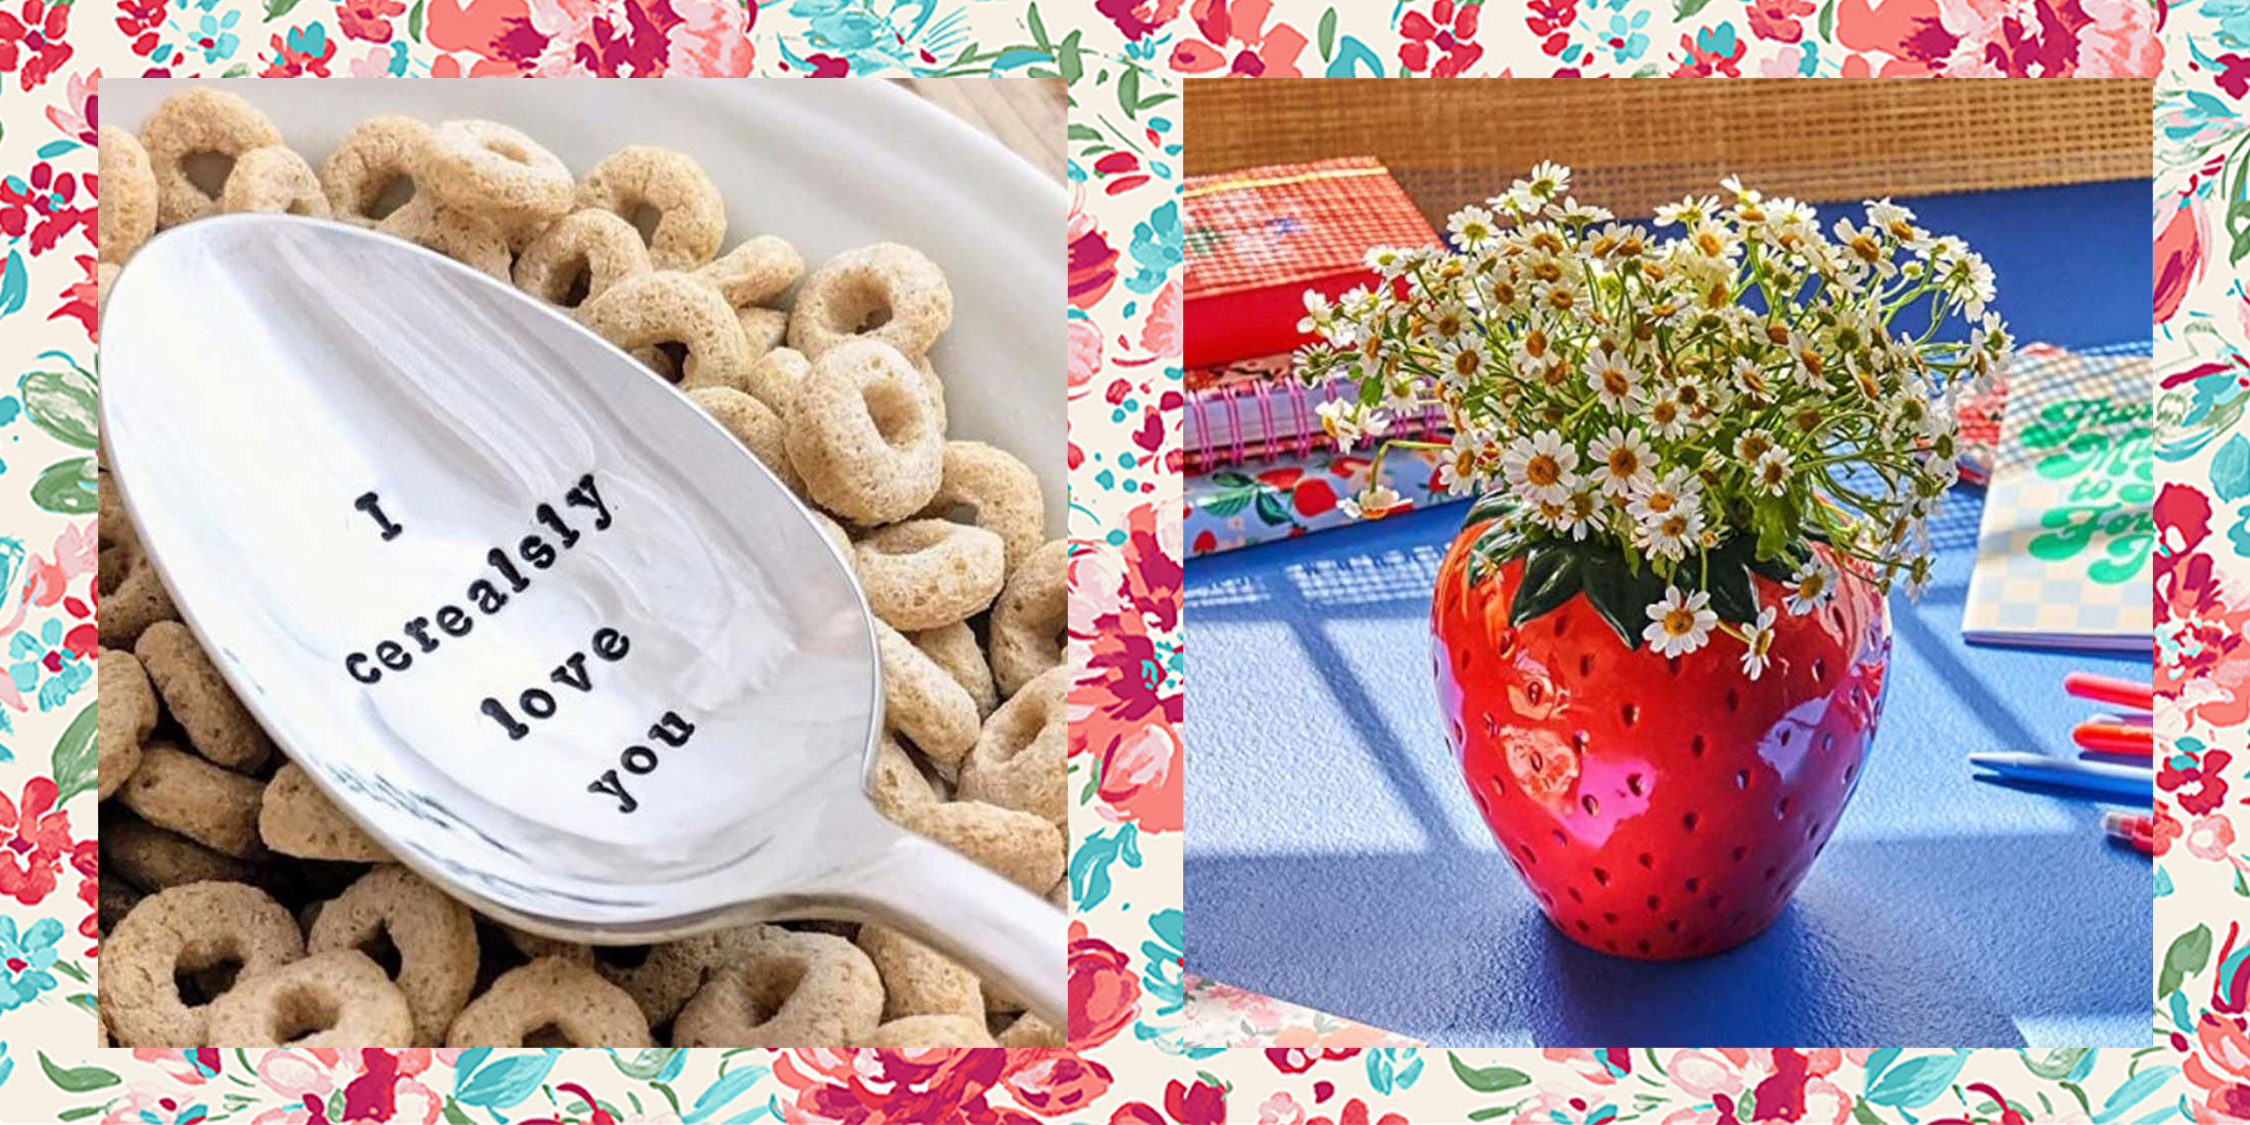 TheKristenDiary: GALENTINE'S DAY GIFT IDEAS!